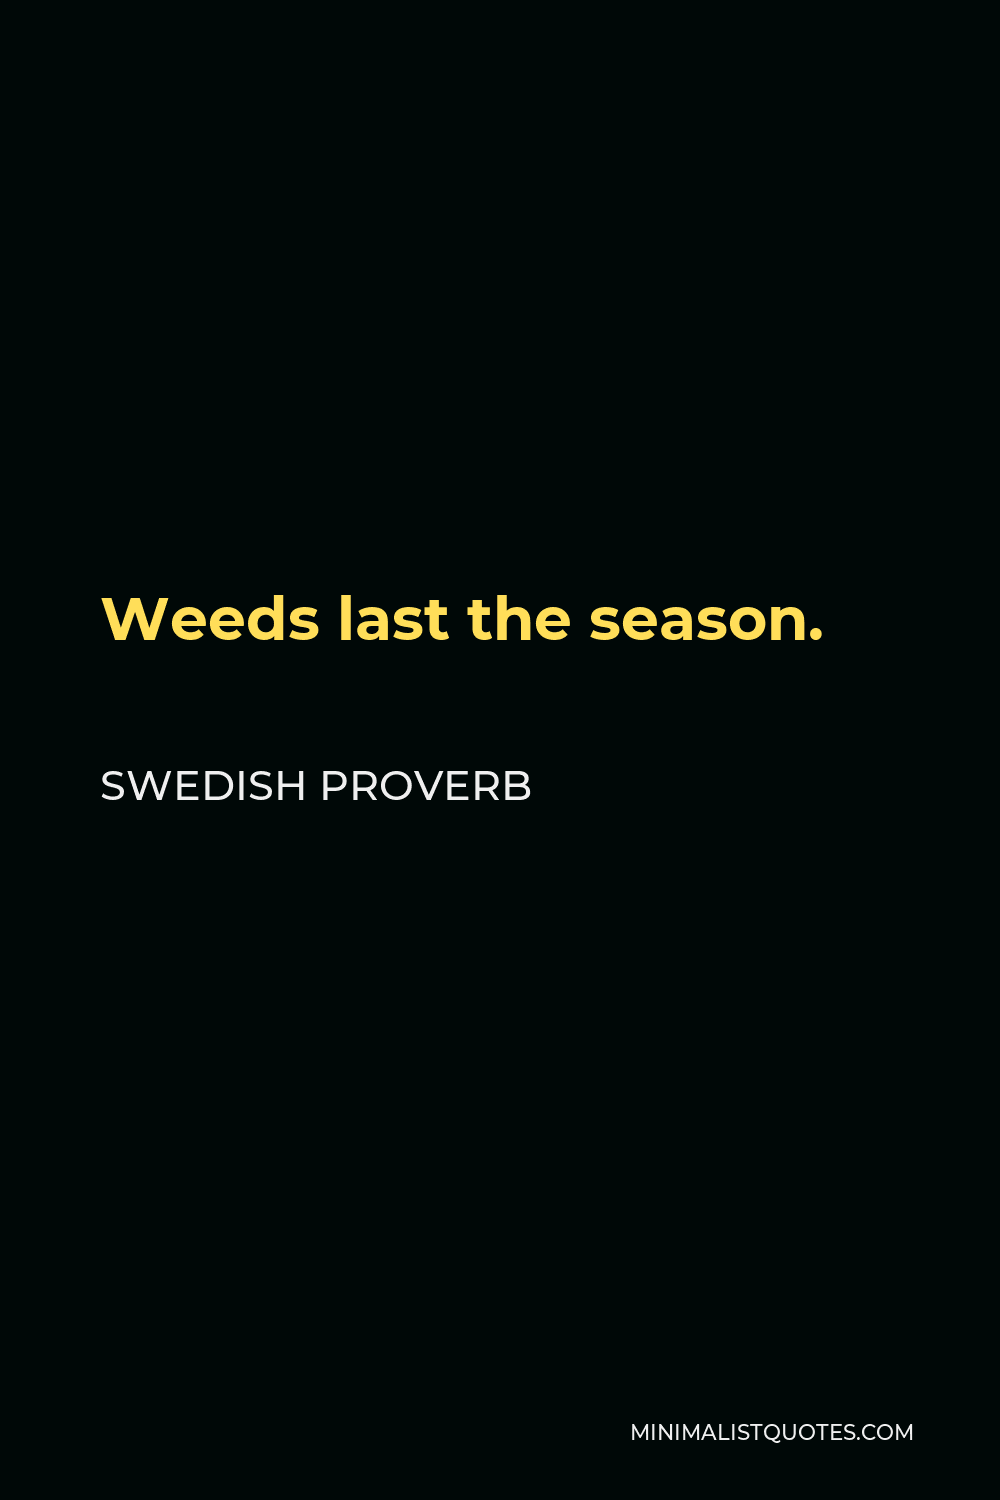 Swedish Proverb Quote - Weeds last the season.